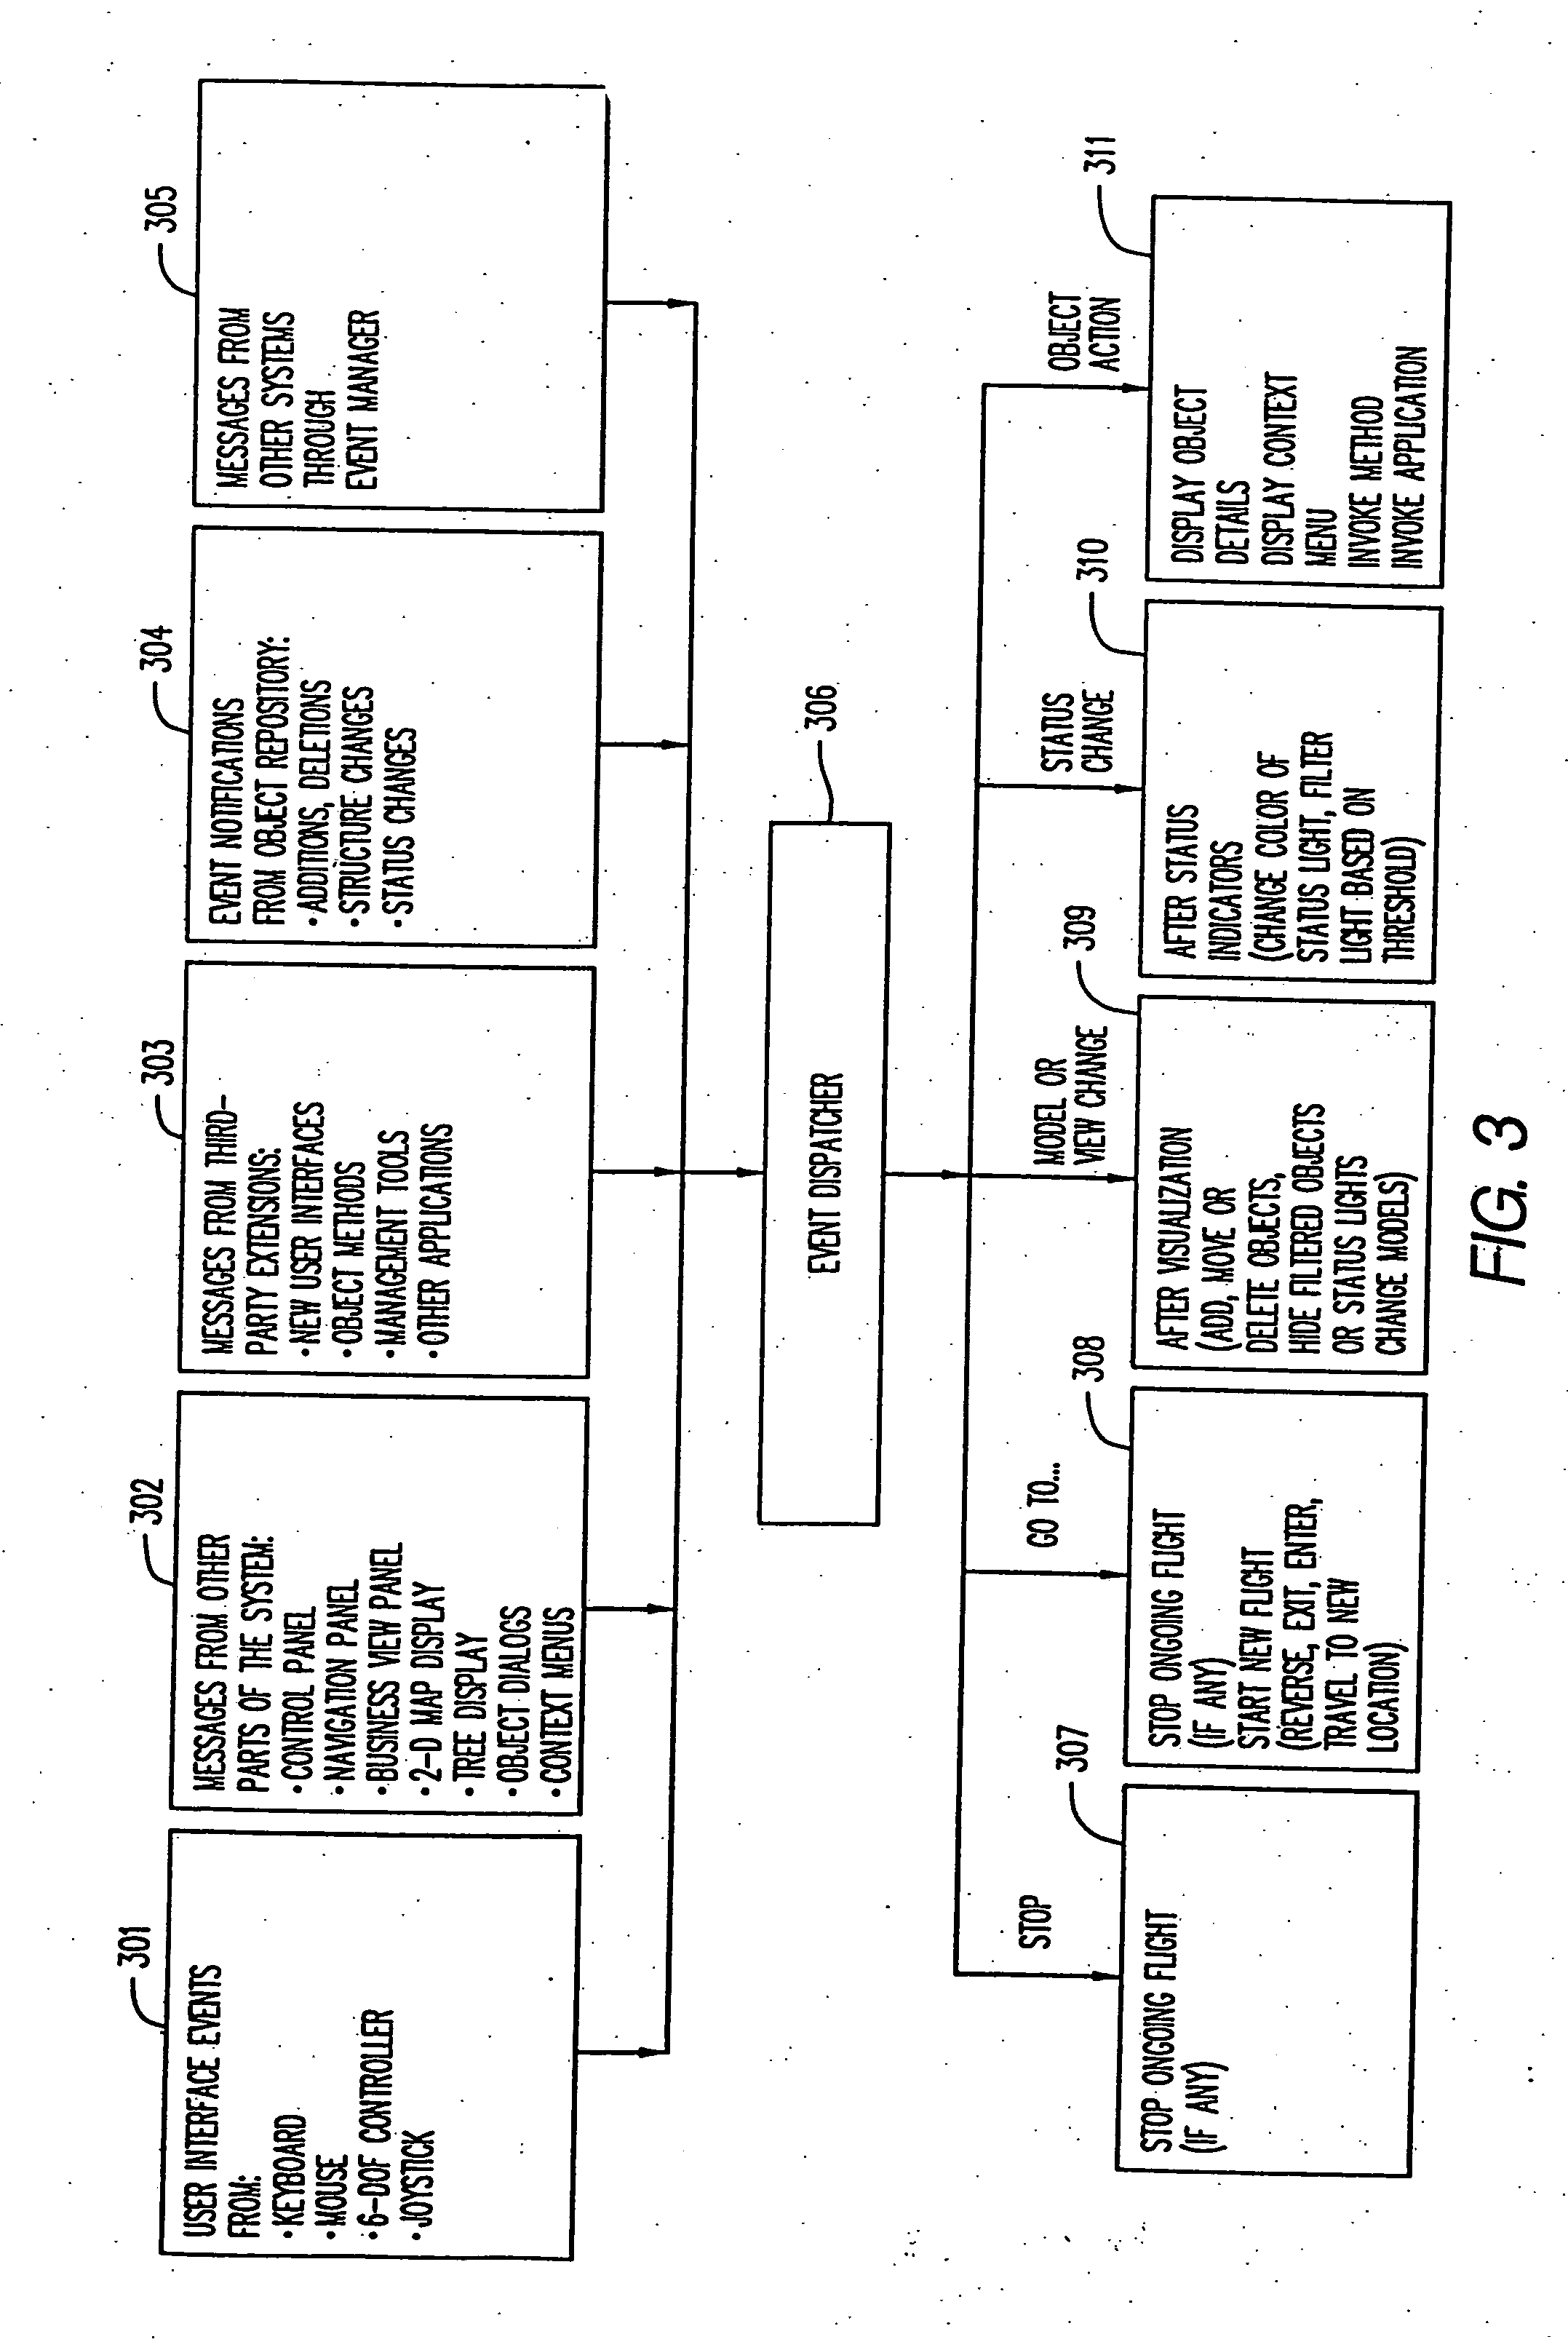 Method and apparatus for intuitively administering networked computer systems